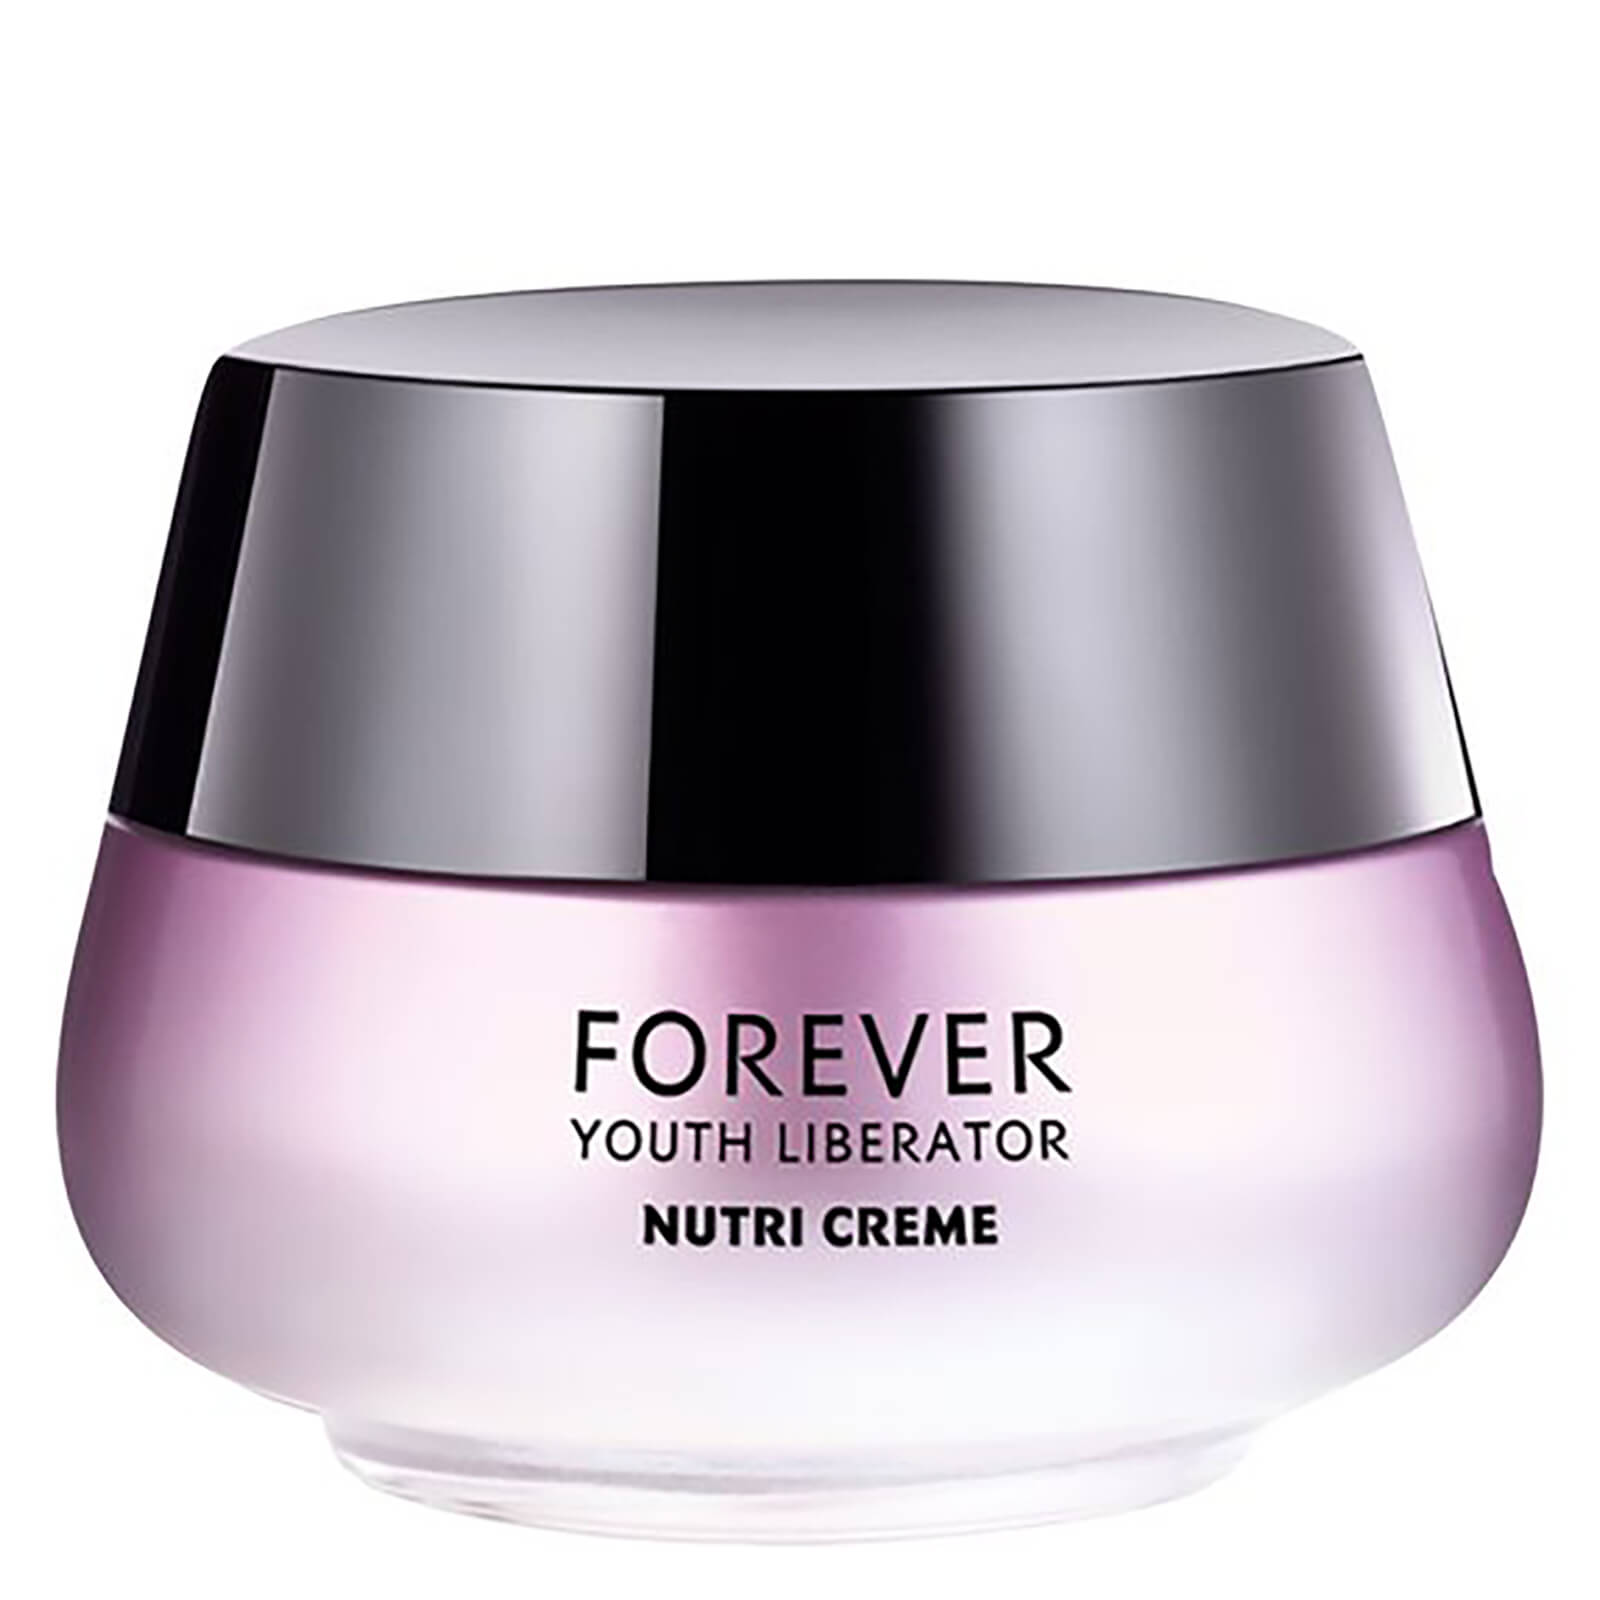 Yves Saint Laurent Forever Youth Liberator crema nutriente giorno 50 ml